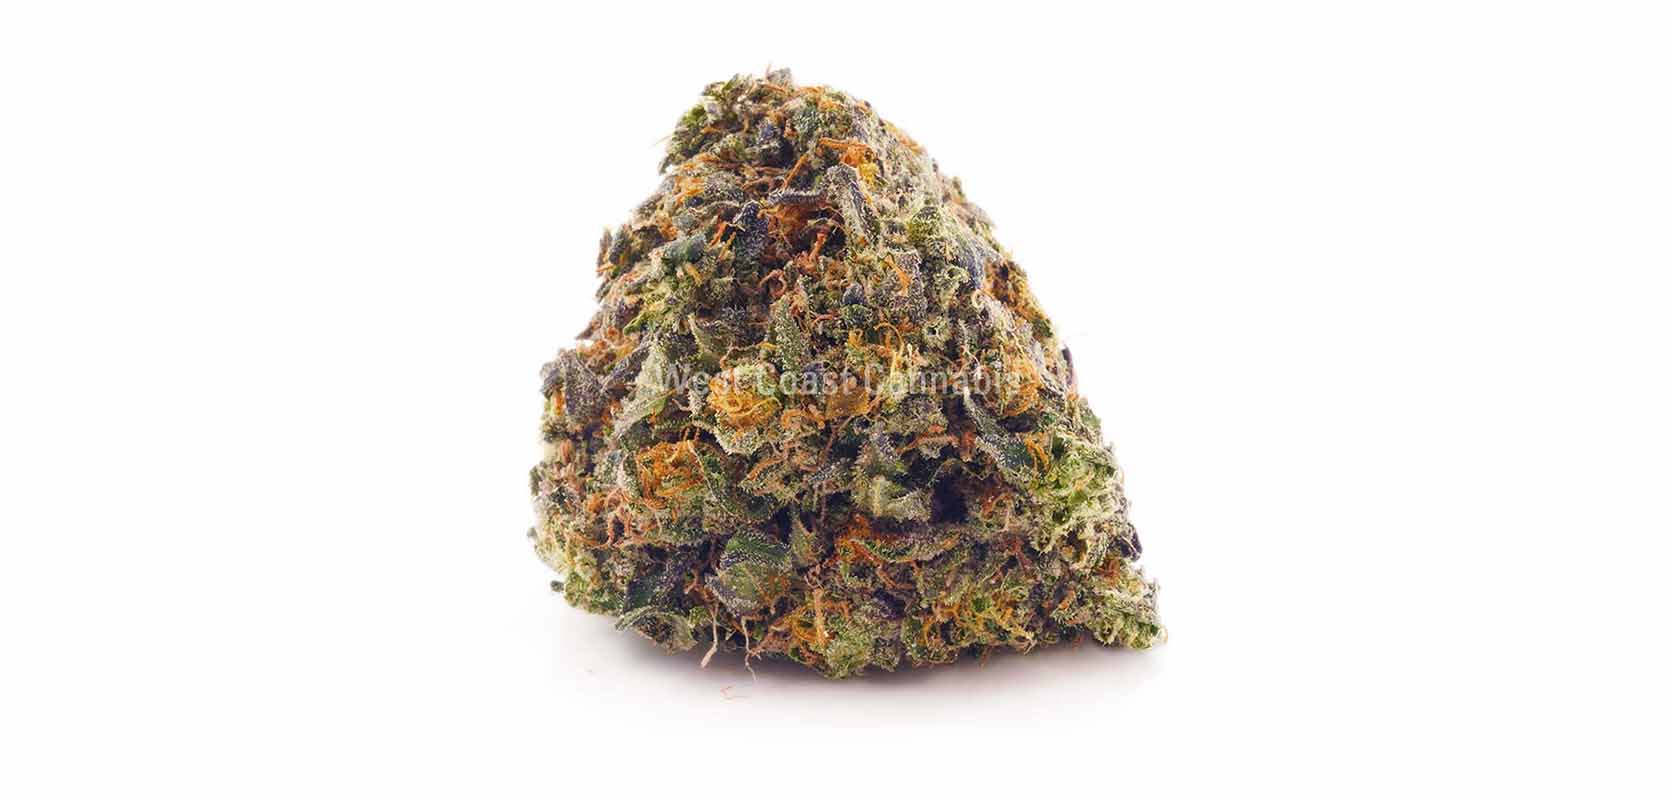 Master Jedi weed online Canada. Weed delivery Nunavut. Buy weed online.